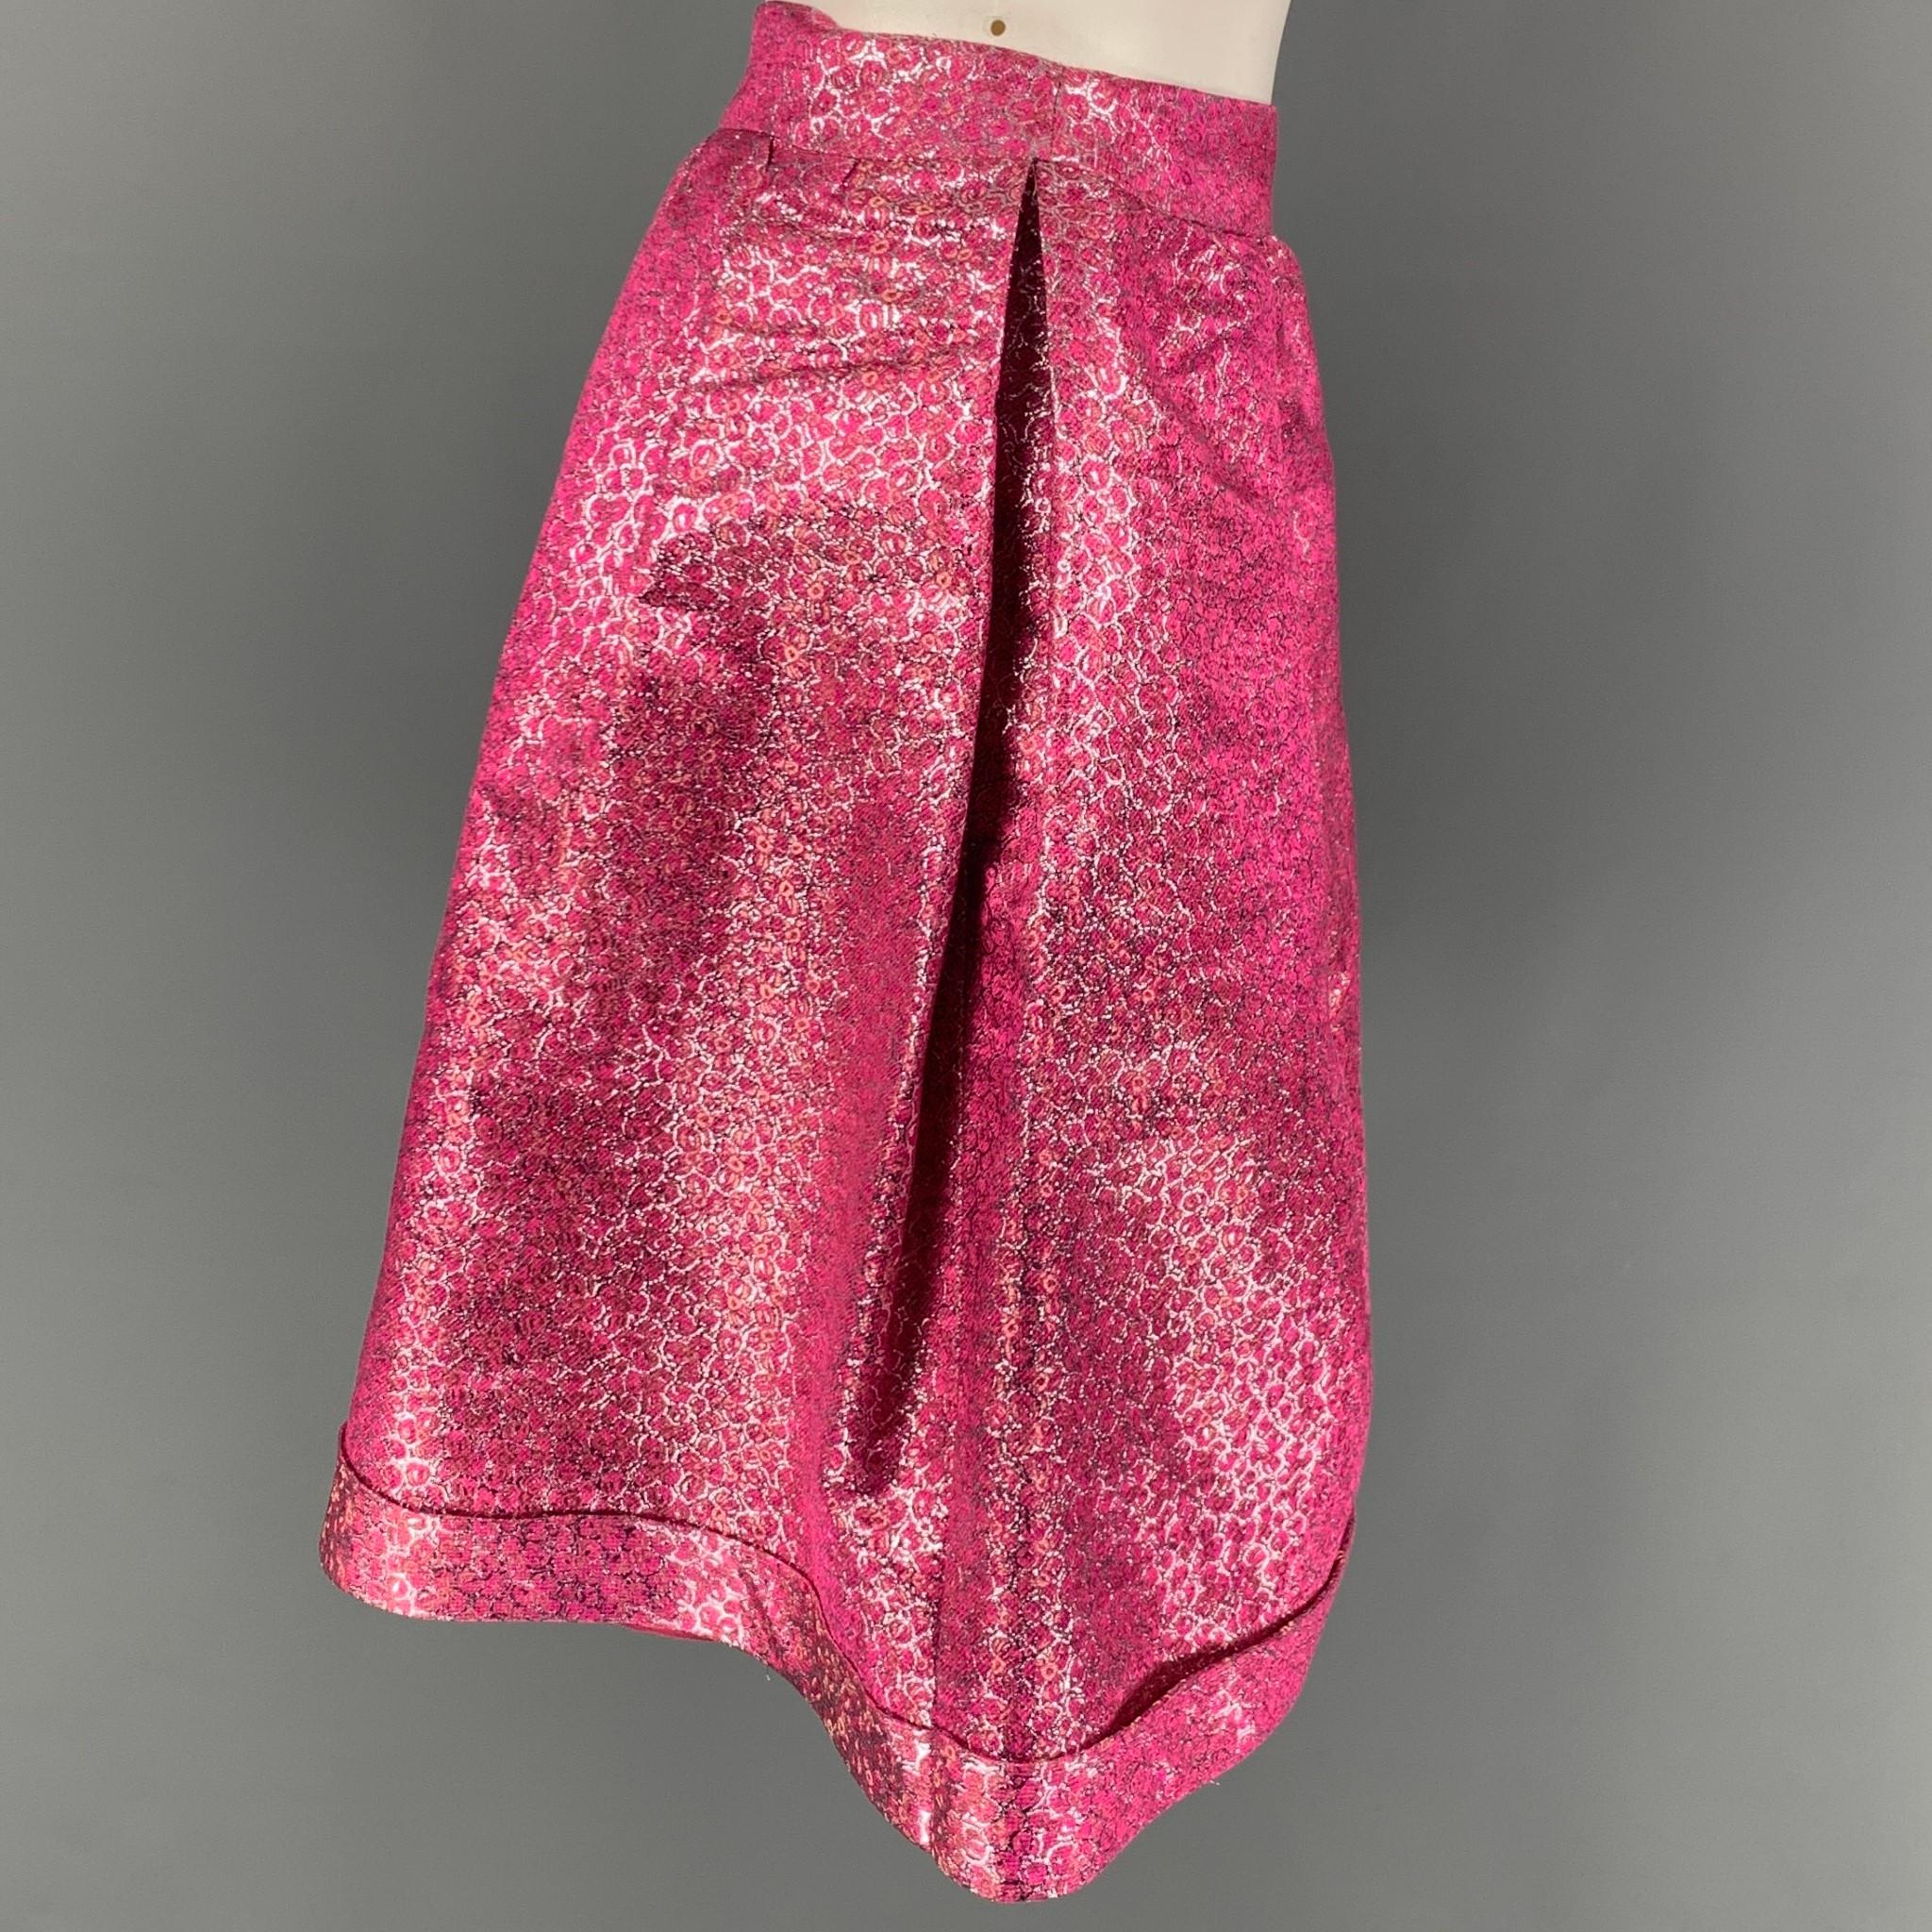 BURBERRY PRORSUM skirt comes in a pink metallic polyester / silk with a slip liner featuring a pleated style and a side zipper closure. Made in Italy. 

Very Good Pre-Owned Condition.
Marked: 40
Original Retail Price: $950.00

Measurements:

Waist: